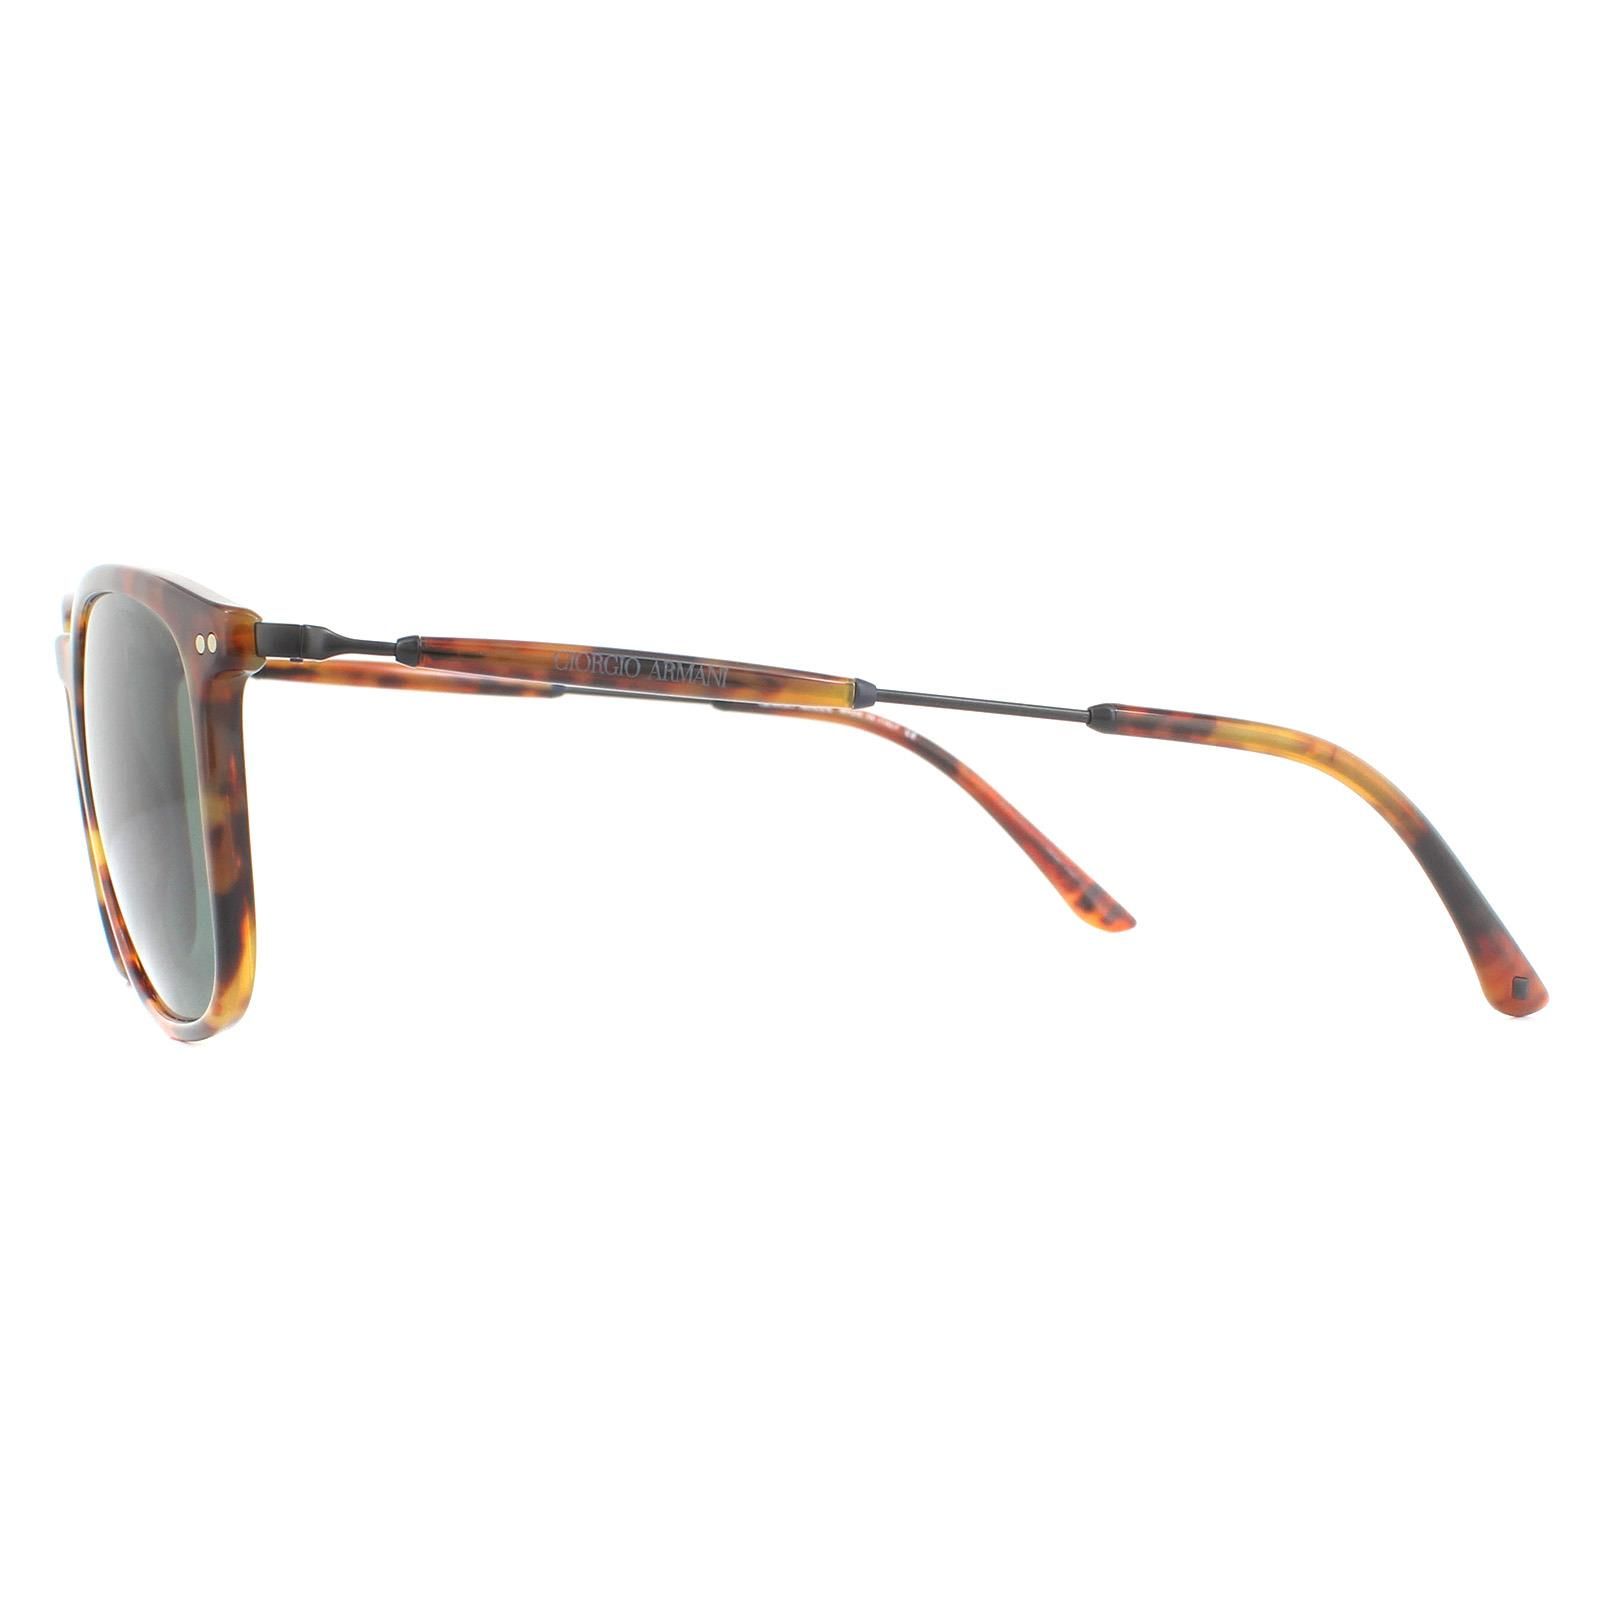 Giorgio Armani Sunglasses AR8098 559071 Yellow Havana Green are a cool lightweight acetate style with metal temple and some nice design touches from Giorgio Armani